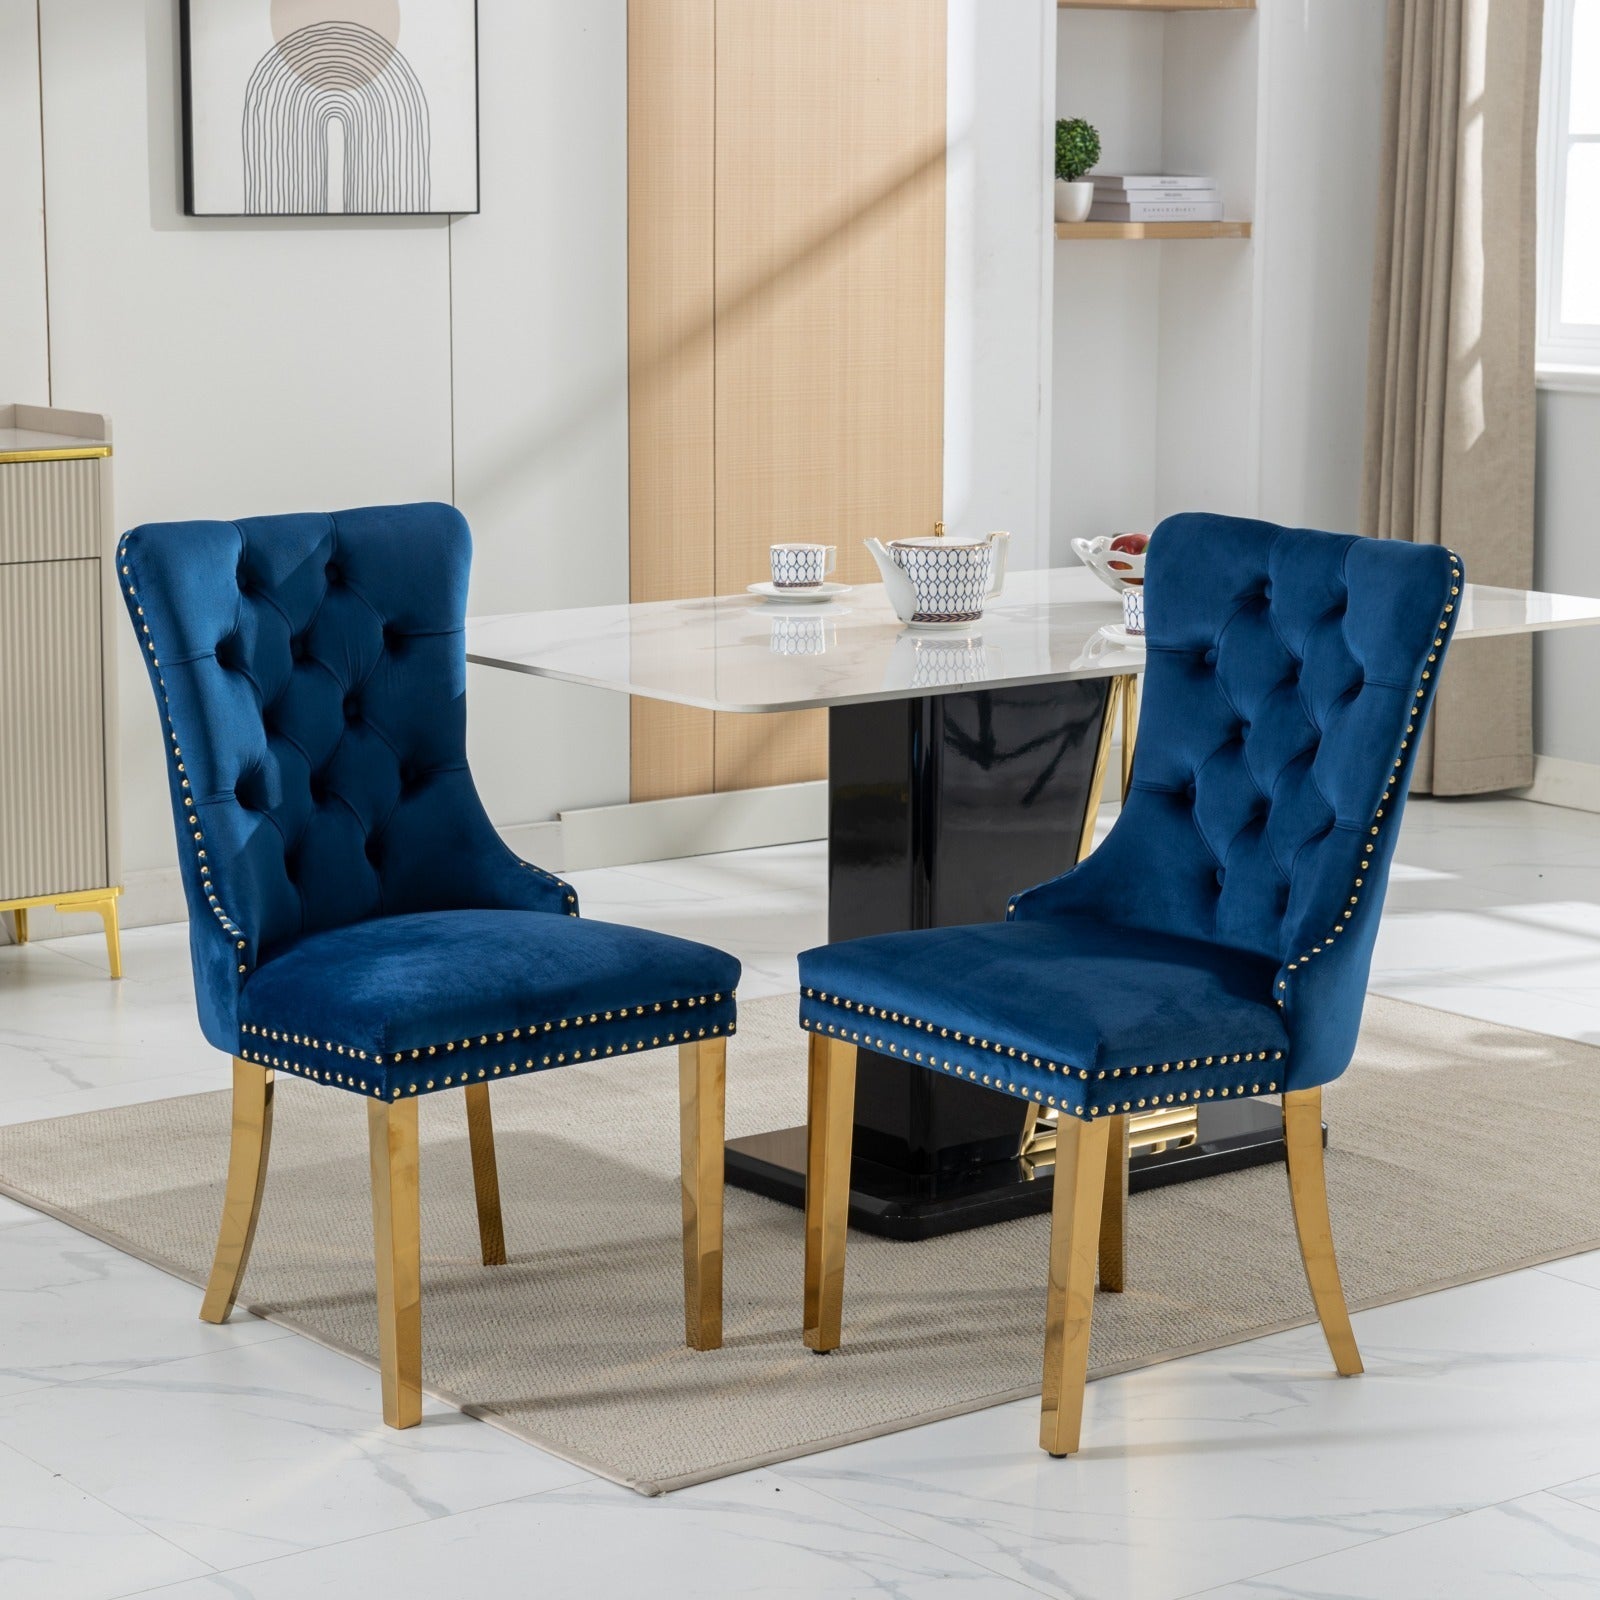 🆓🚛 High-End Tufted Solid Wood Contemporary Velvet Upholstered Dining Chair With Golden Stainless Steel Plating Legs, Nailhead Trim, Set of 2, Blue and Gold